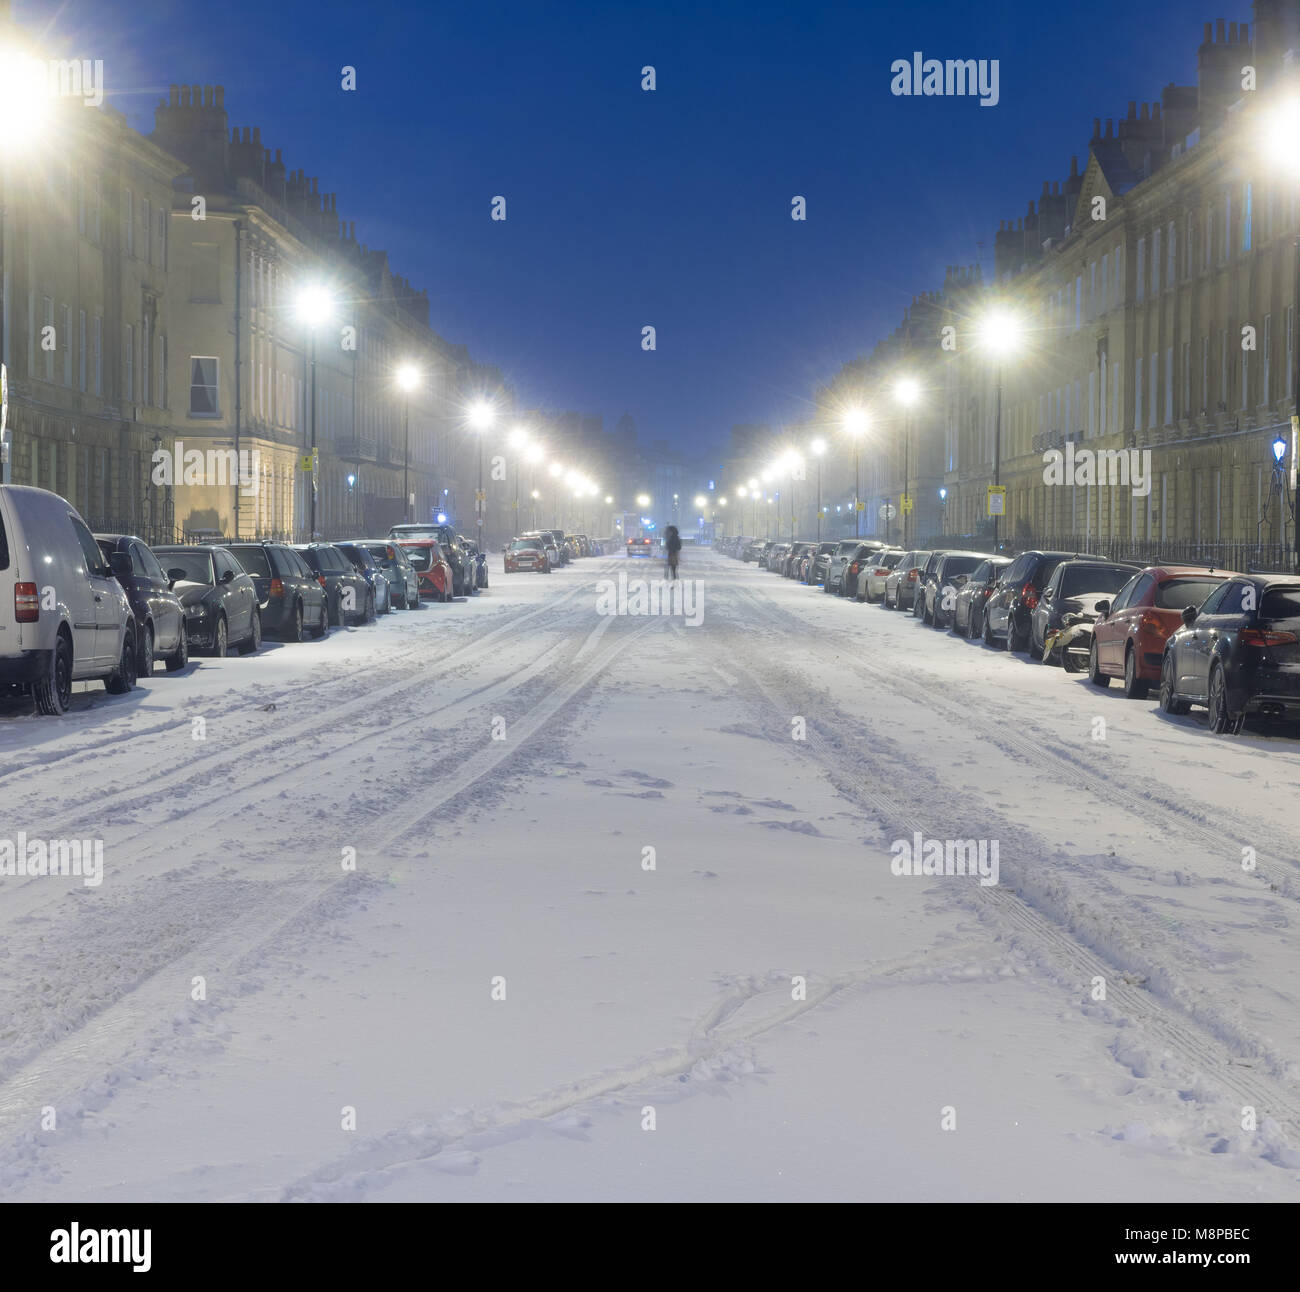 Great Pulteney Street at night in snow, with person walking in road. Majestic road in UNESCO World Heritage city after unusually heavy snowfall Stock Photo